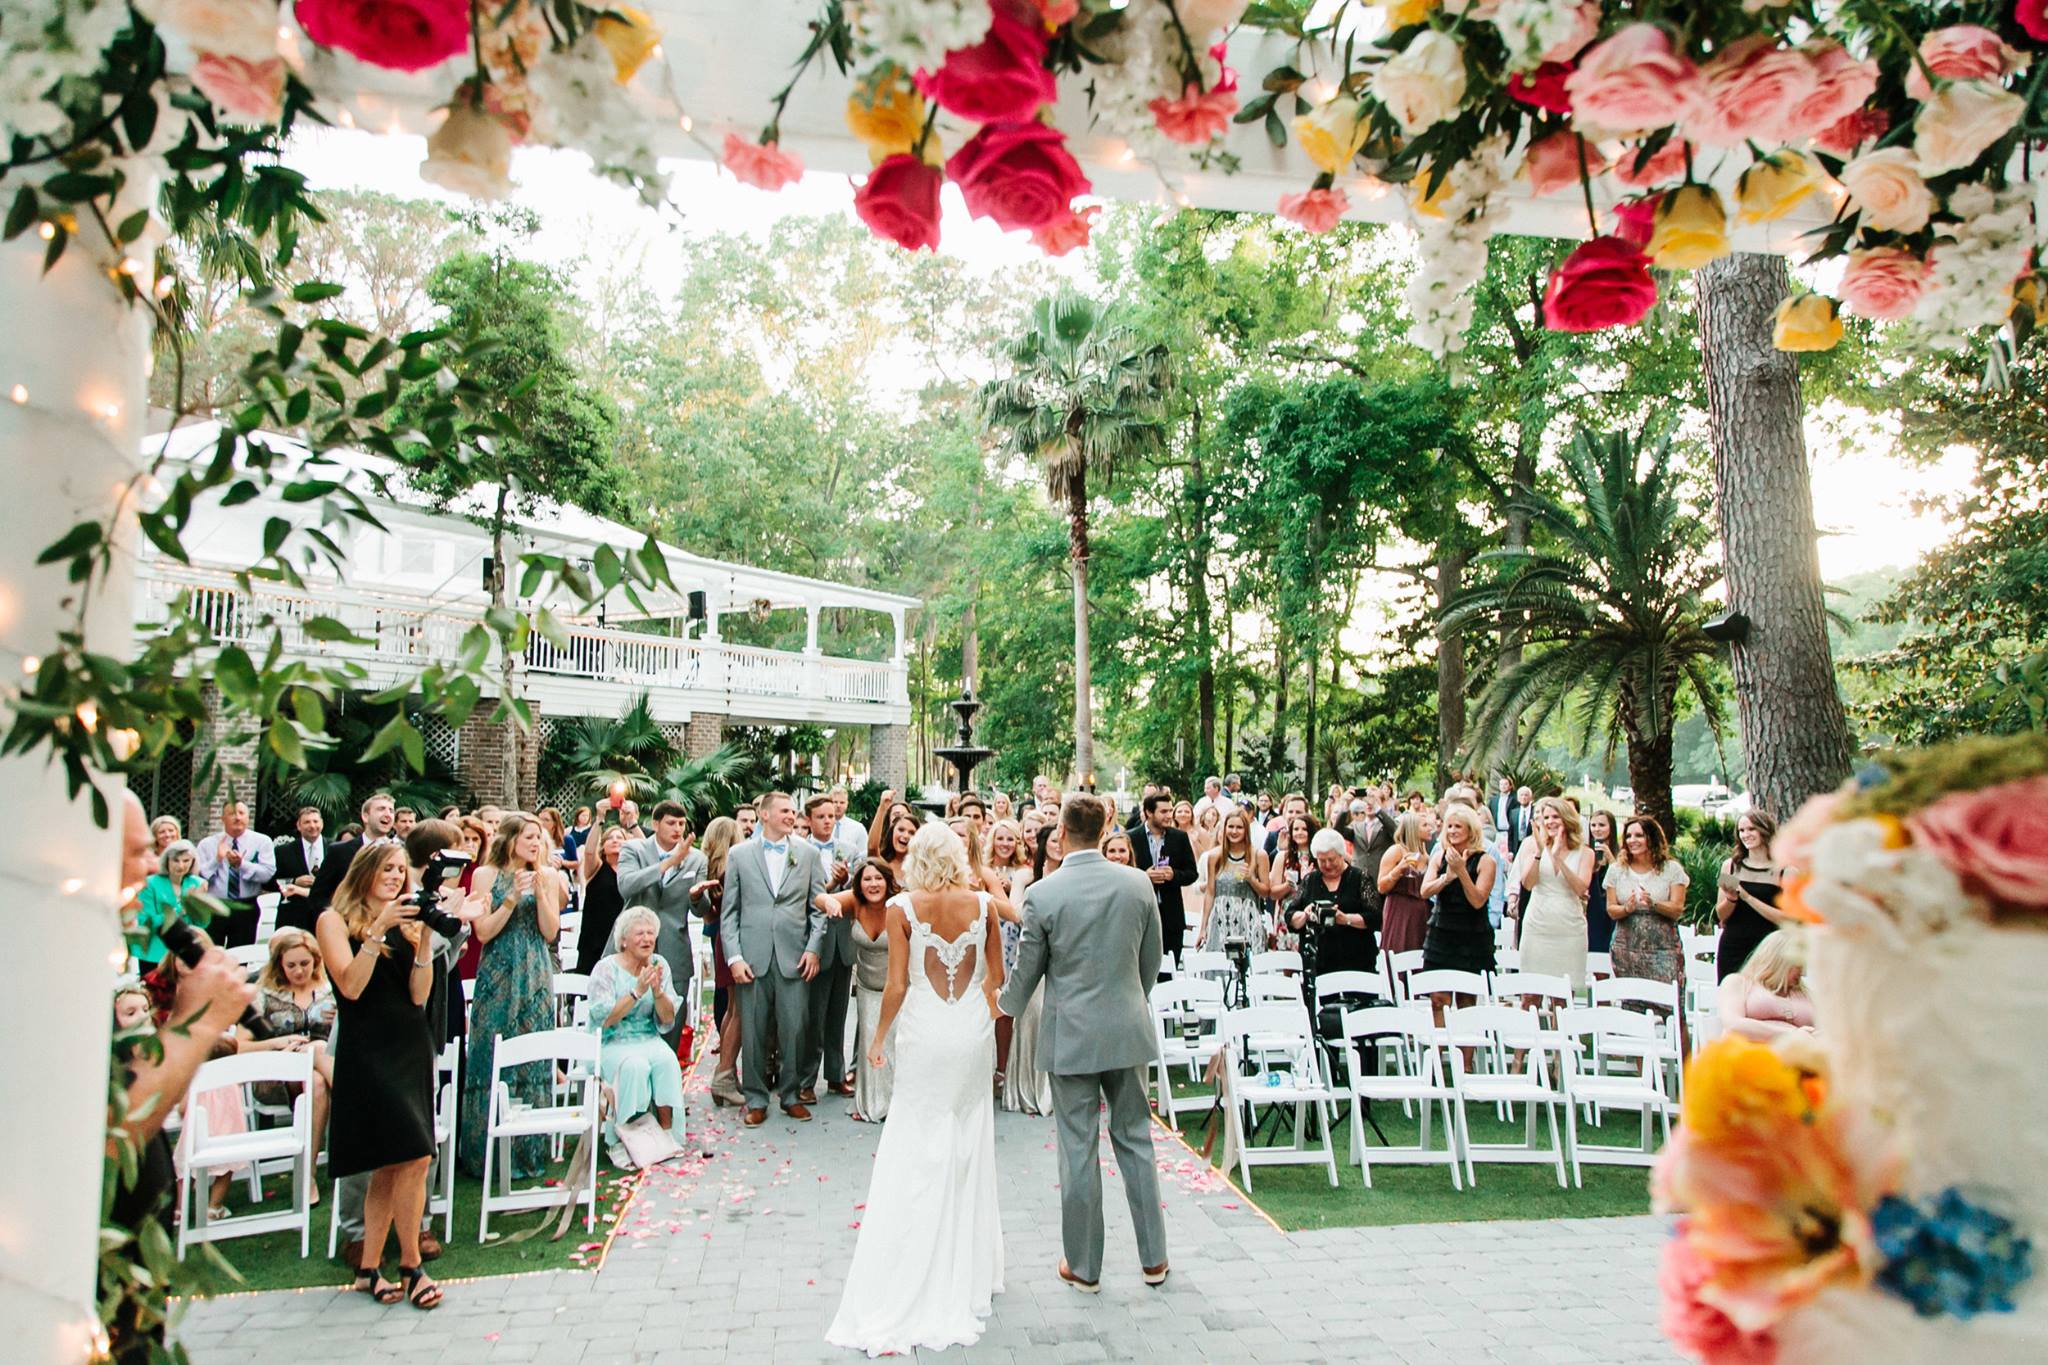 4 Tips On How To Maximize The Use Of Your Outdoor Wedding Venue